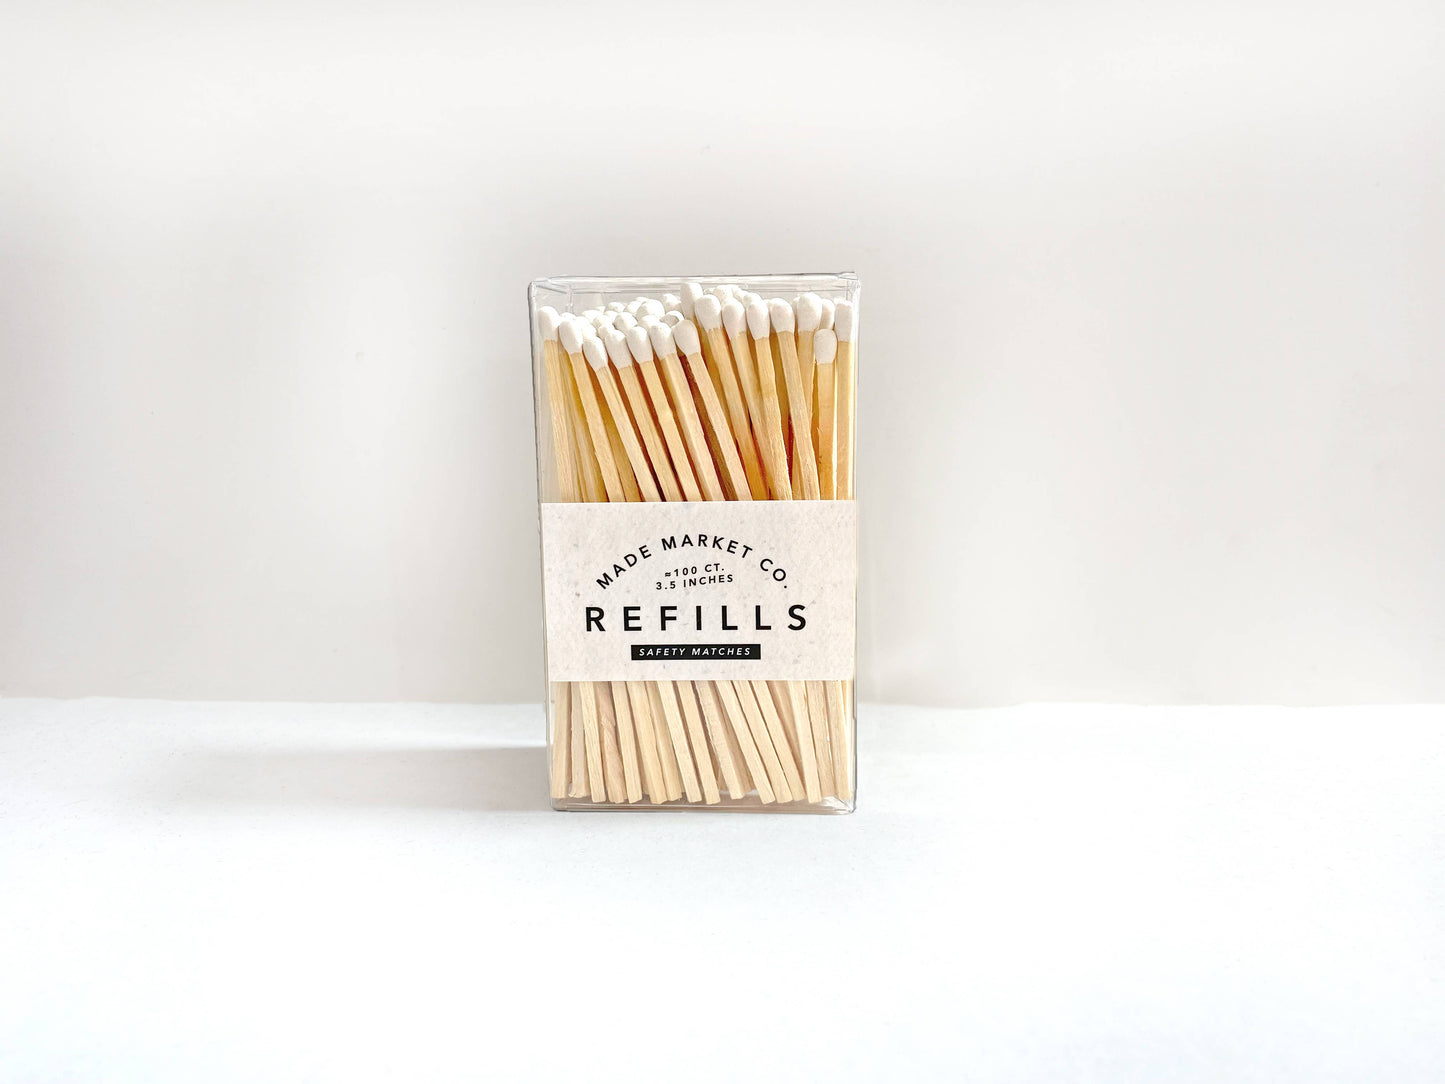 Refills of Wooden Safety Matches & Refill: CAMEL